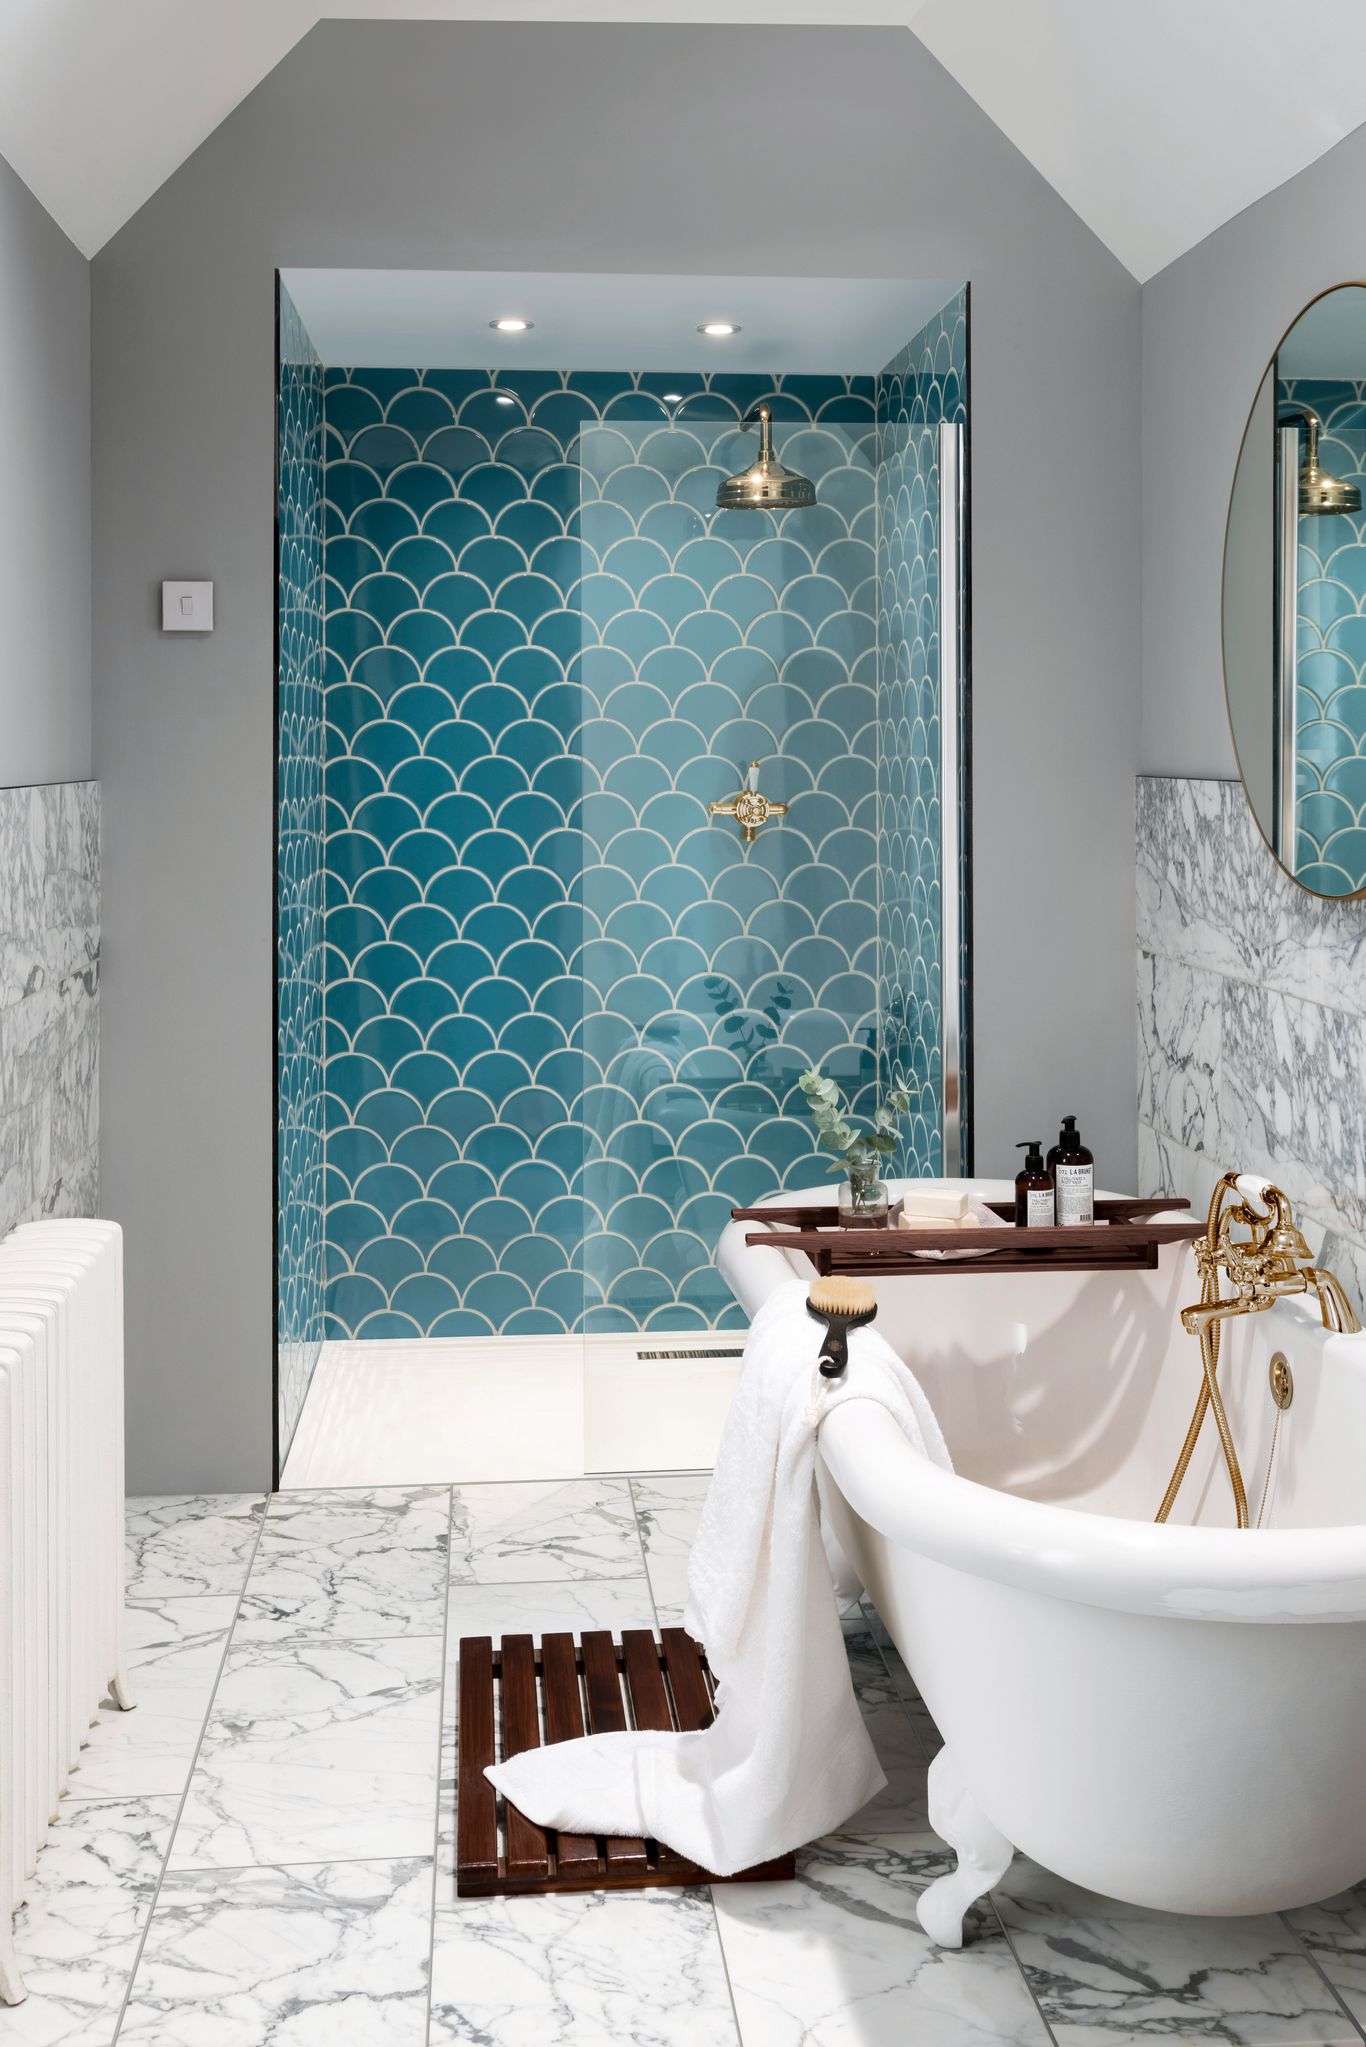 15 Small Bathroom Tile Ideas Stylish Ways To Make Your Space Feel Bigger Real Homes 